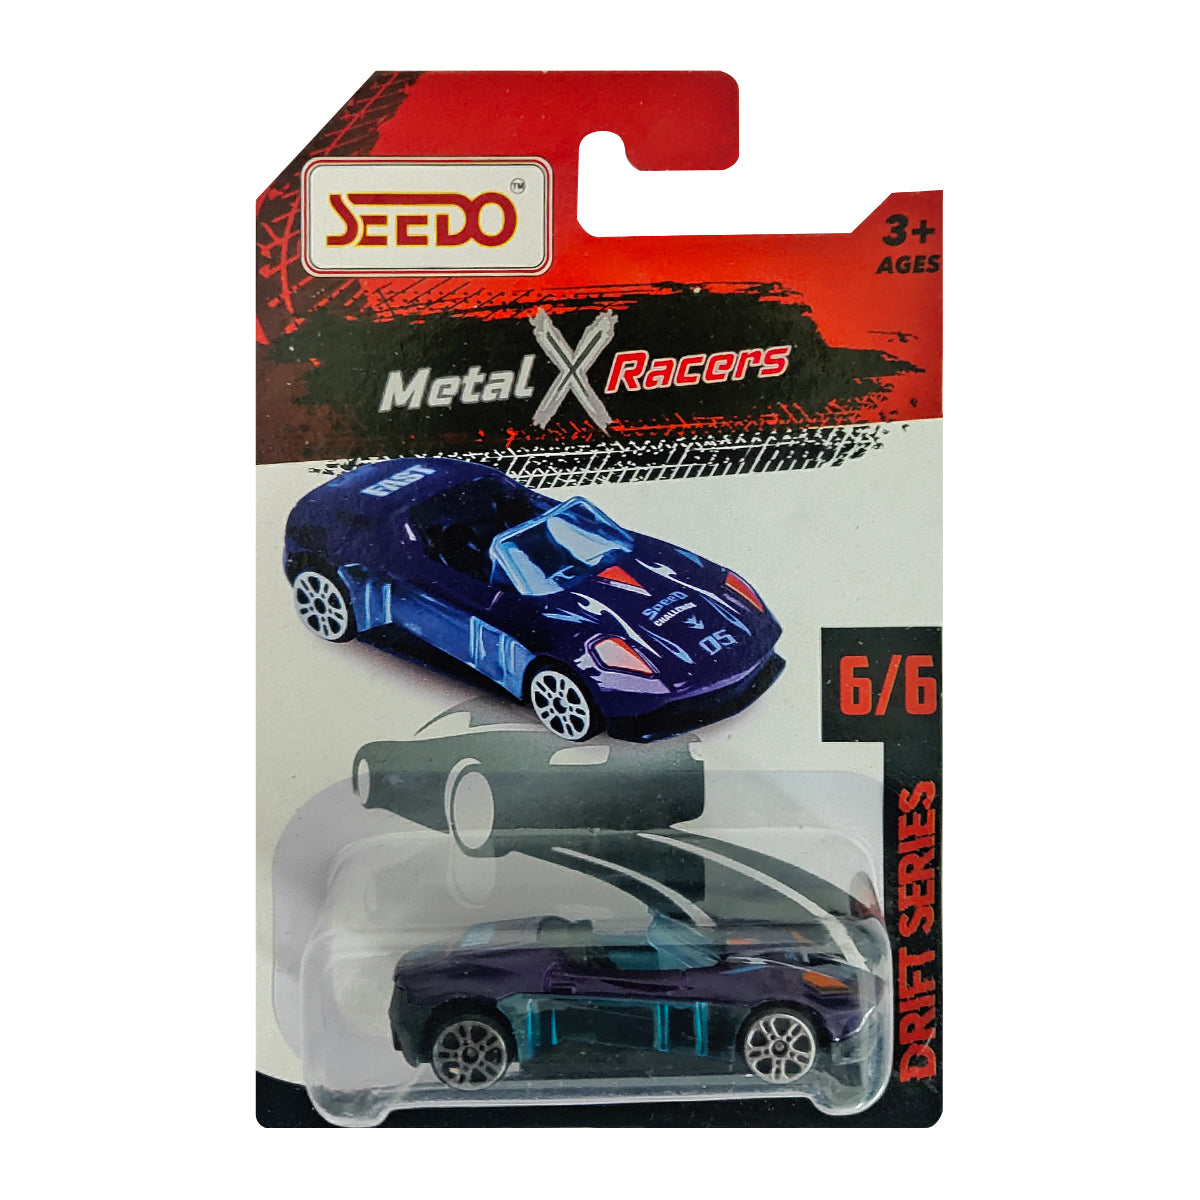 Seedo Metal X Racers Drift Series Die Cast Car for Ages 3+, Pack Of 6